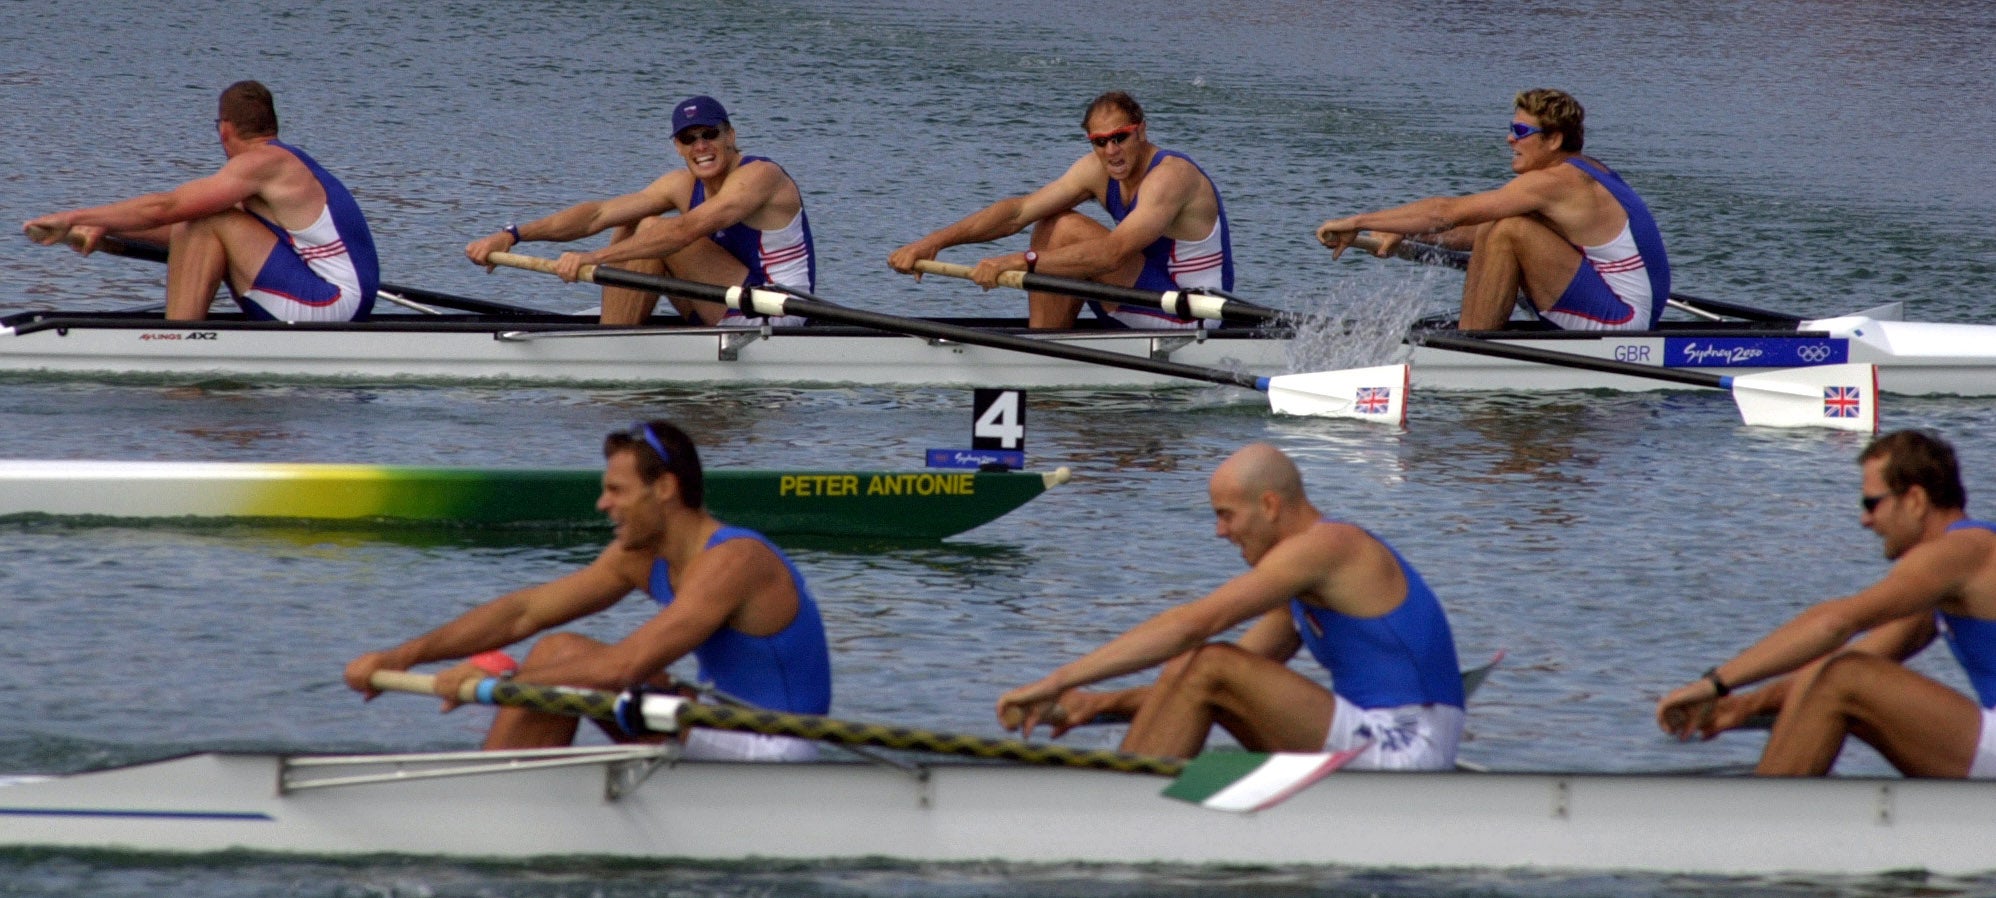 Matthew Pinsent, Tim Foster, Steve Redgrave and James Cracknell cross the line to win the coxless fours final, Sydney 2000